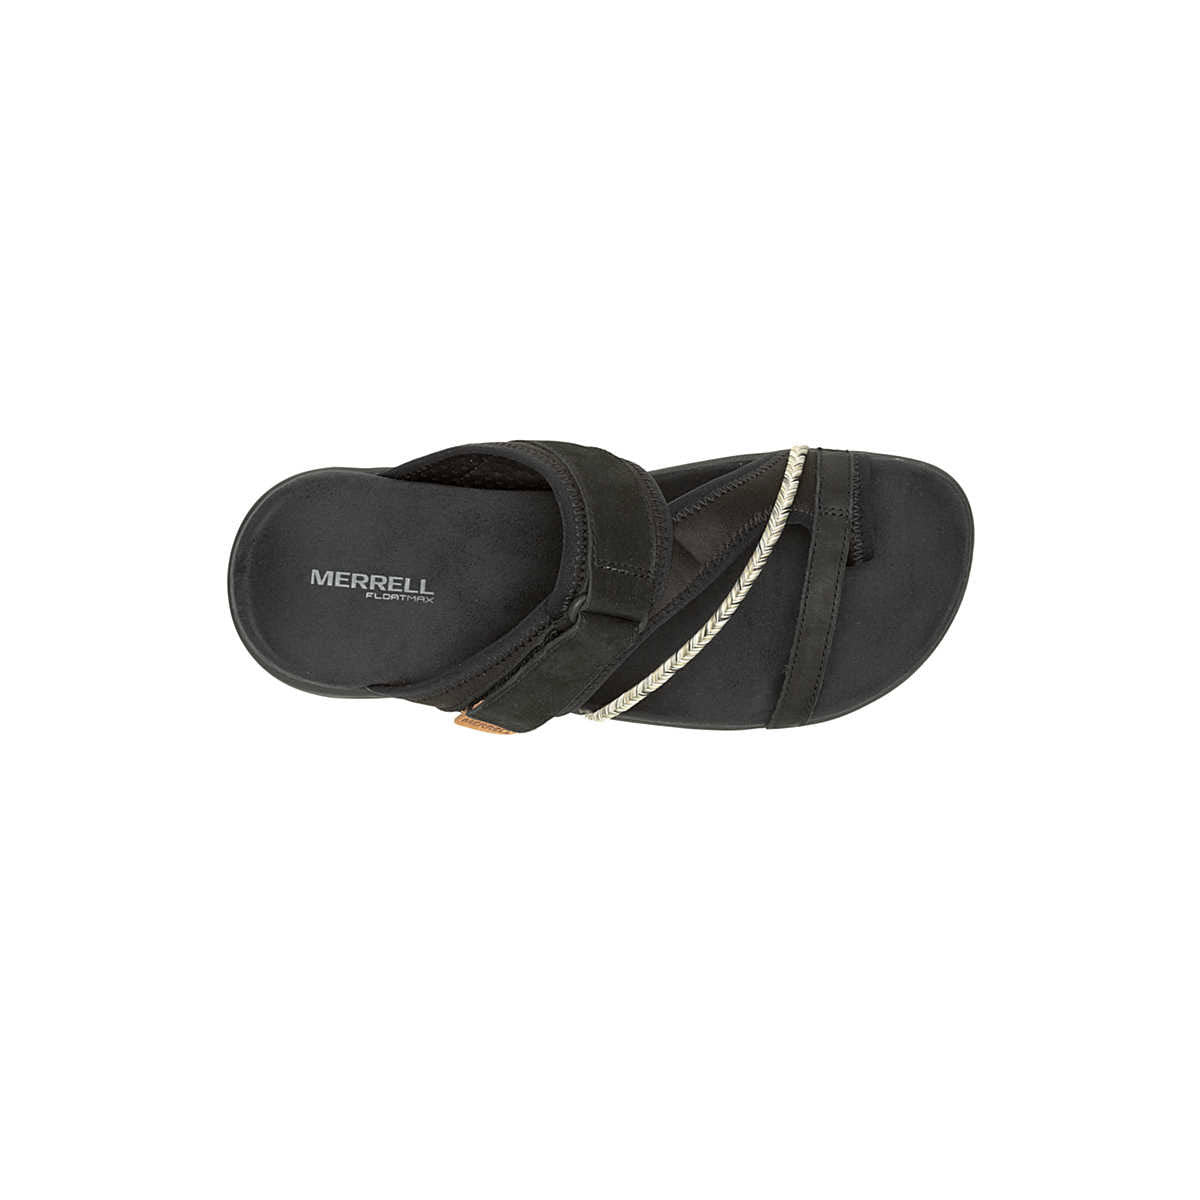 A black Merrell Terran 4 Post sandal with a closed toe and decorative white stitching, viewed from the top on a white background.